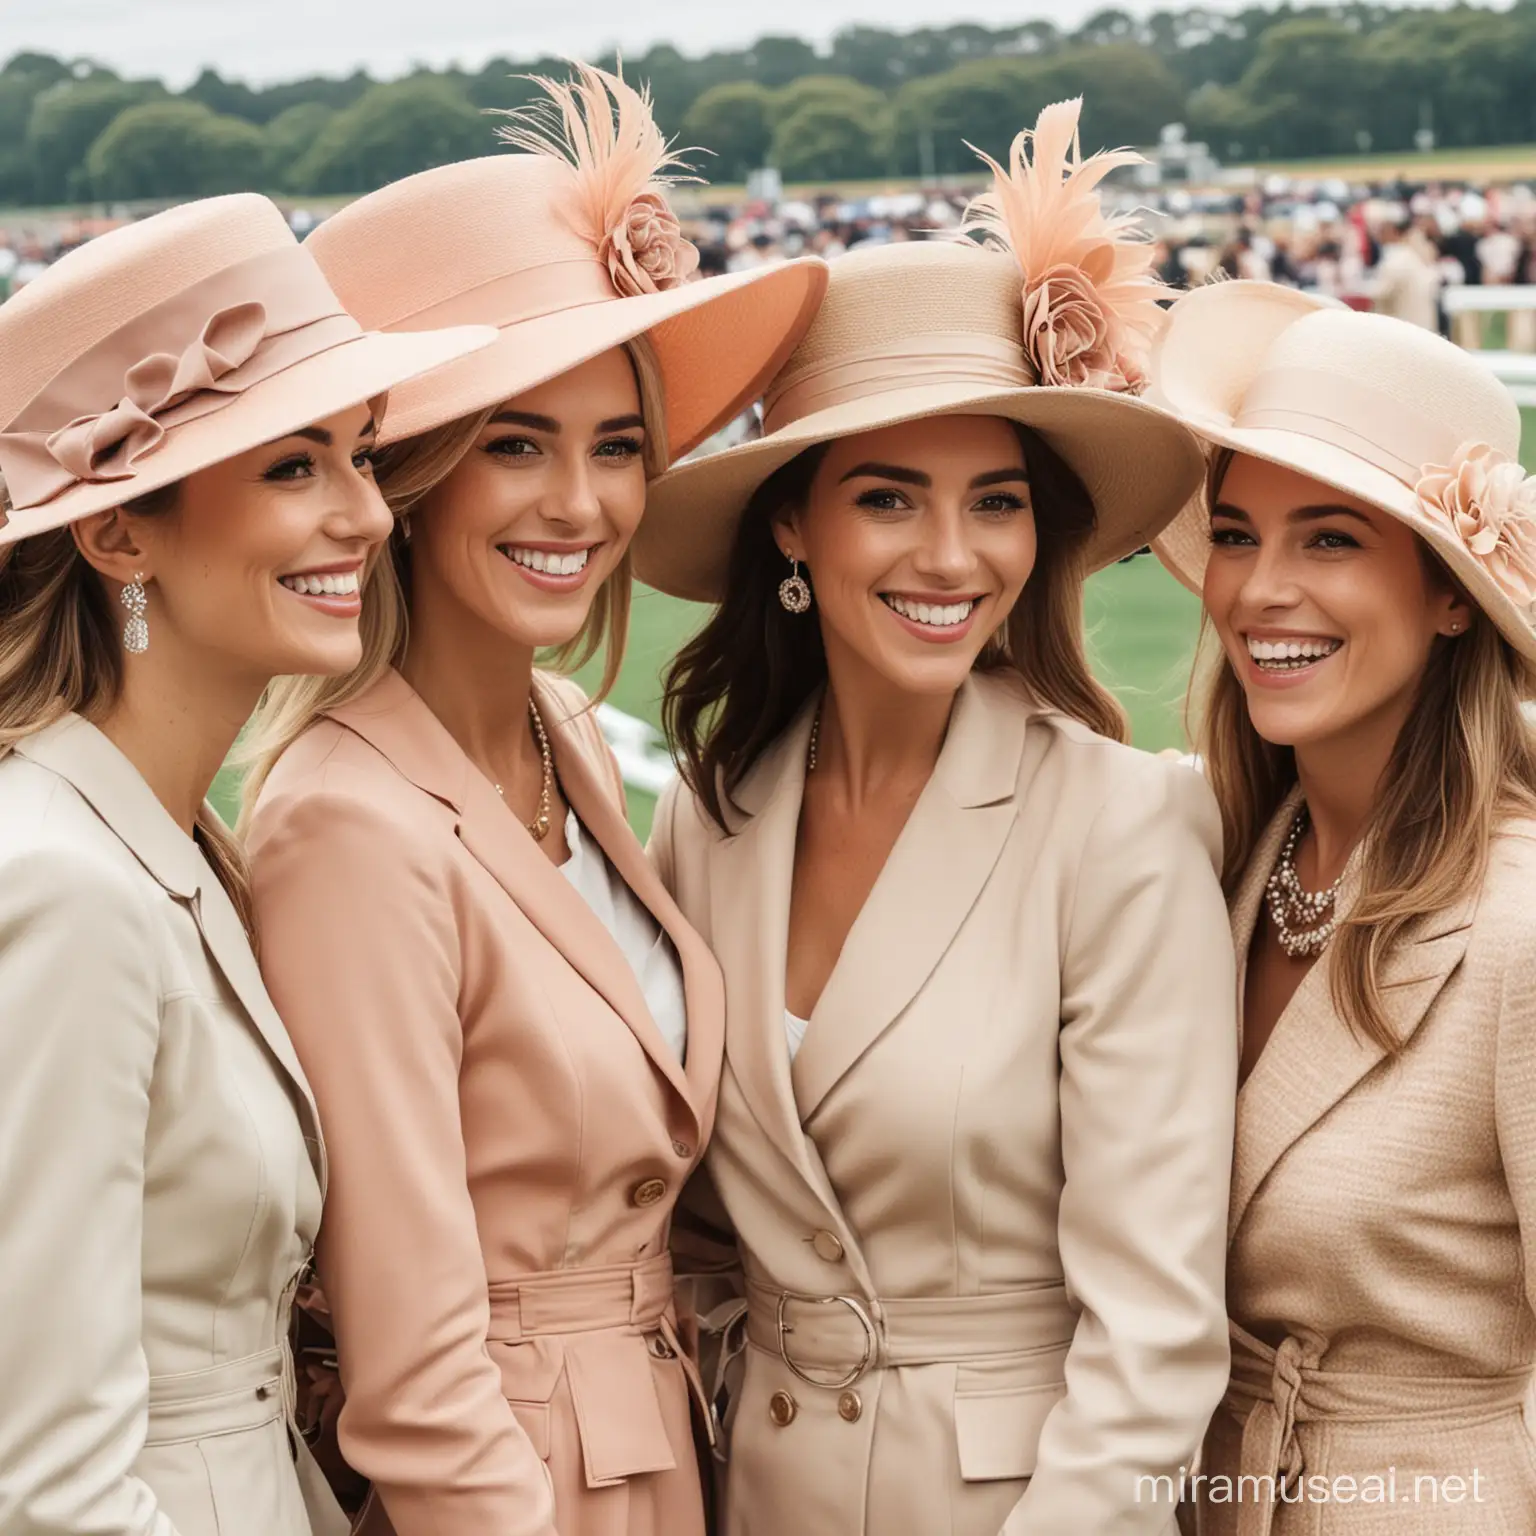 Elegant Women in Posh Hats at the Race Course